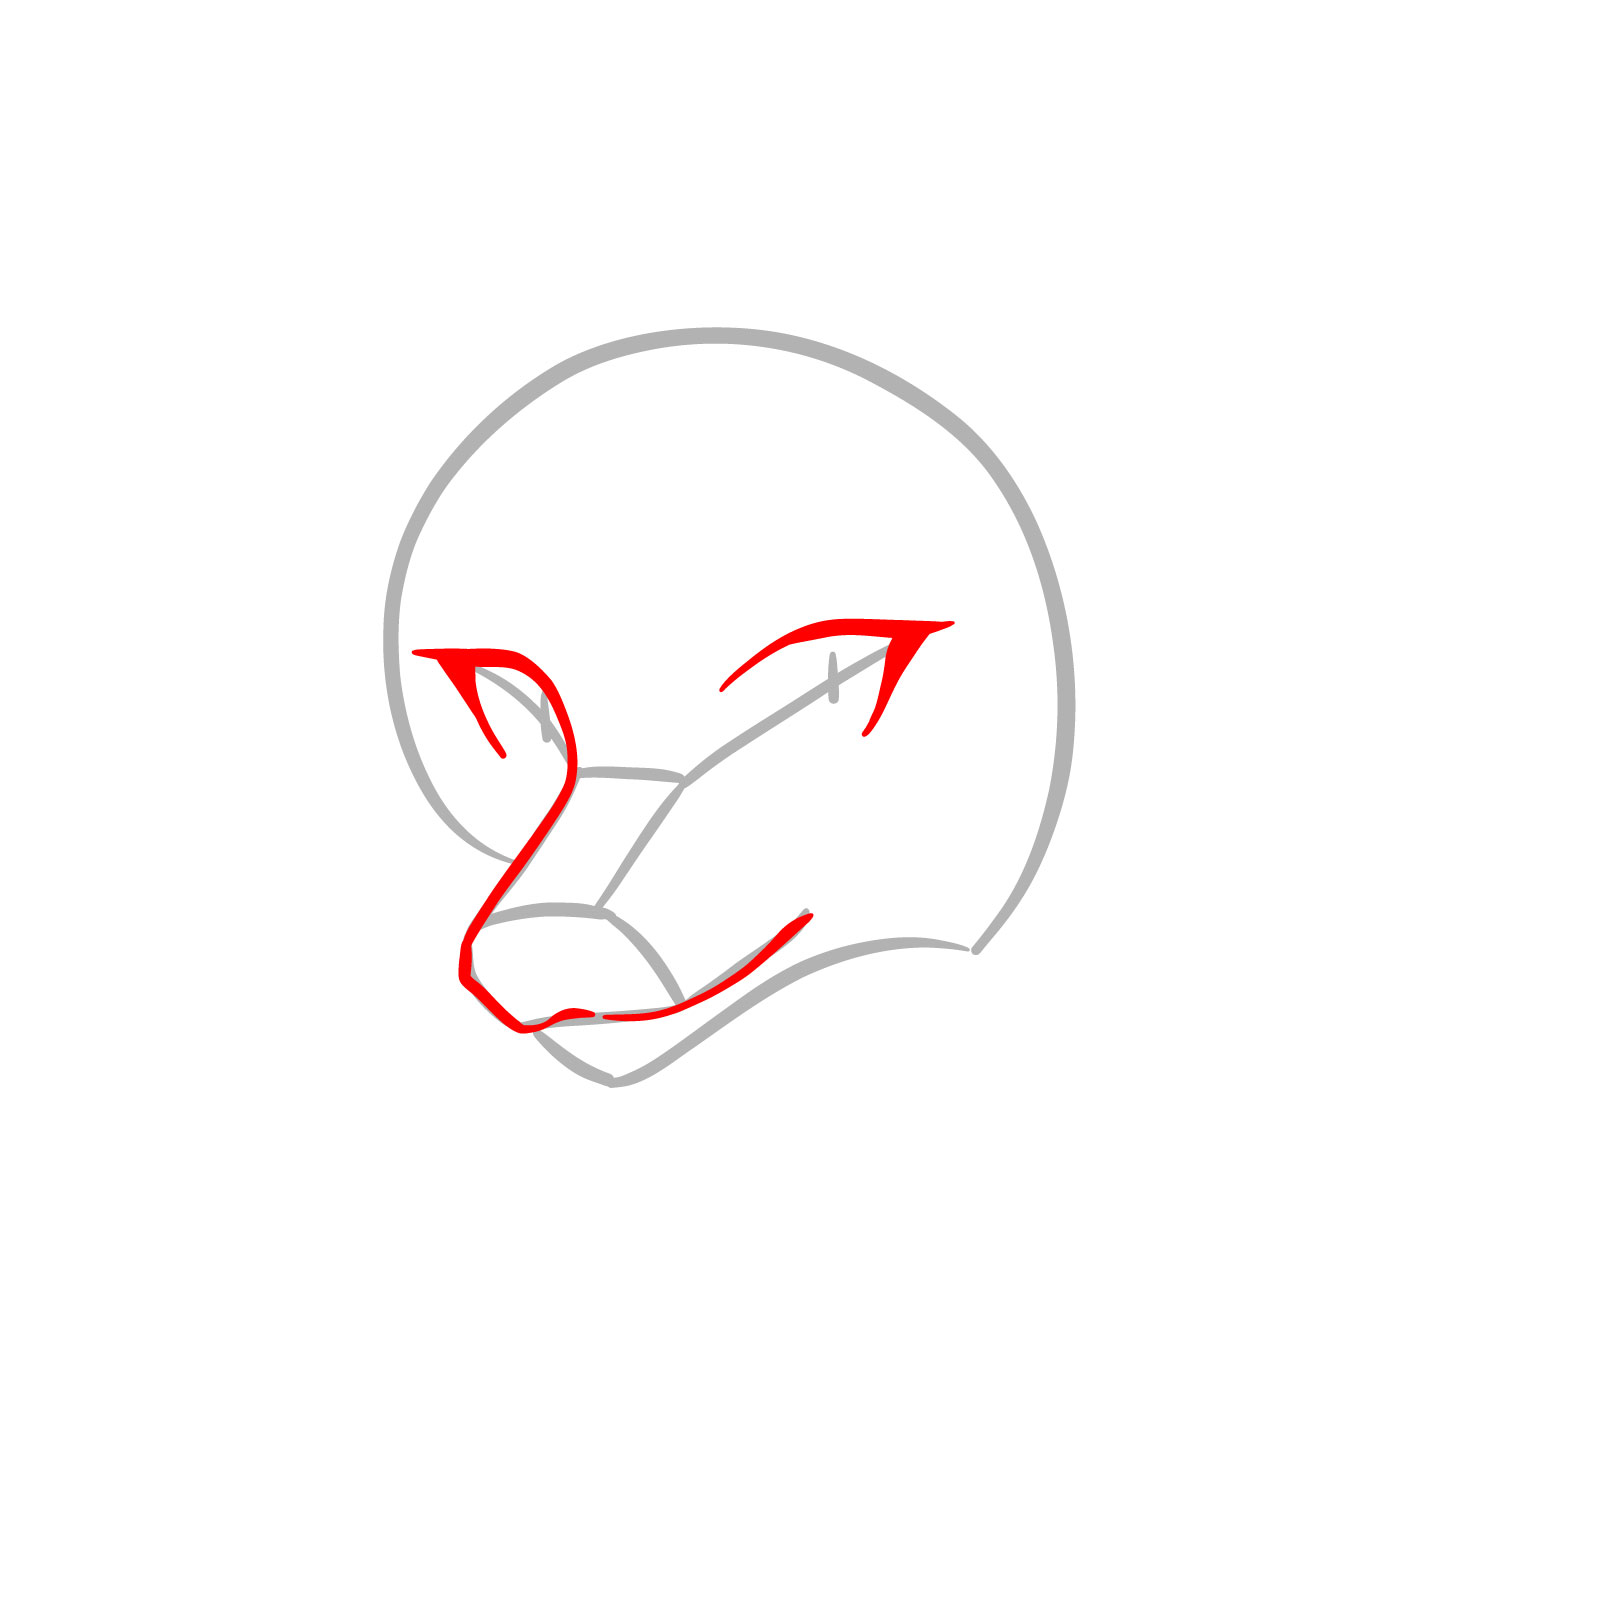 Step 3 of an anime wolf face guide, detailing the snout and eye outlines